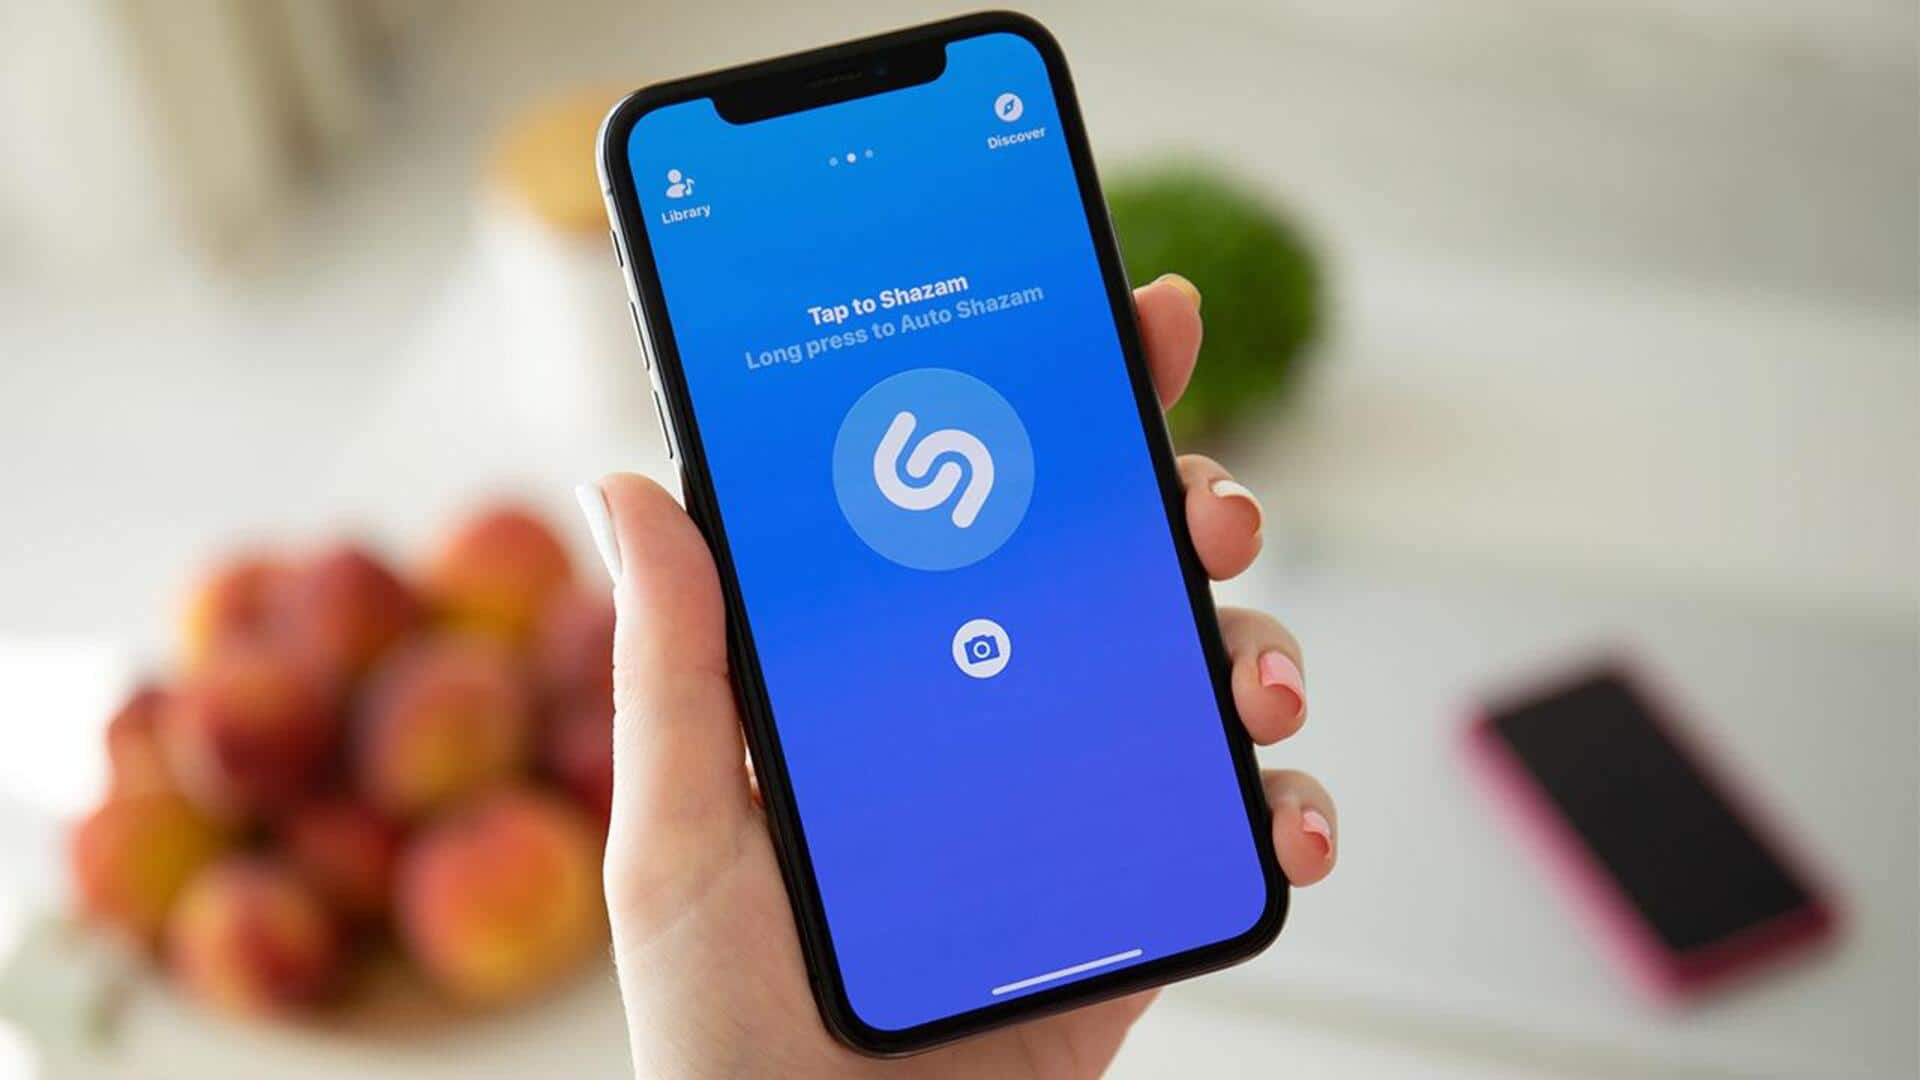 Shazam now lets you identify songs while wearing headphones